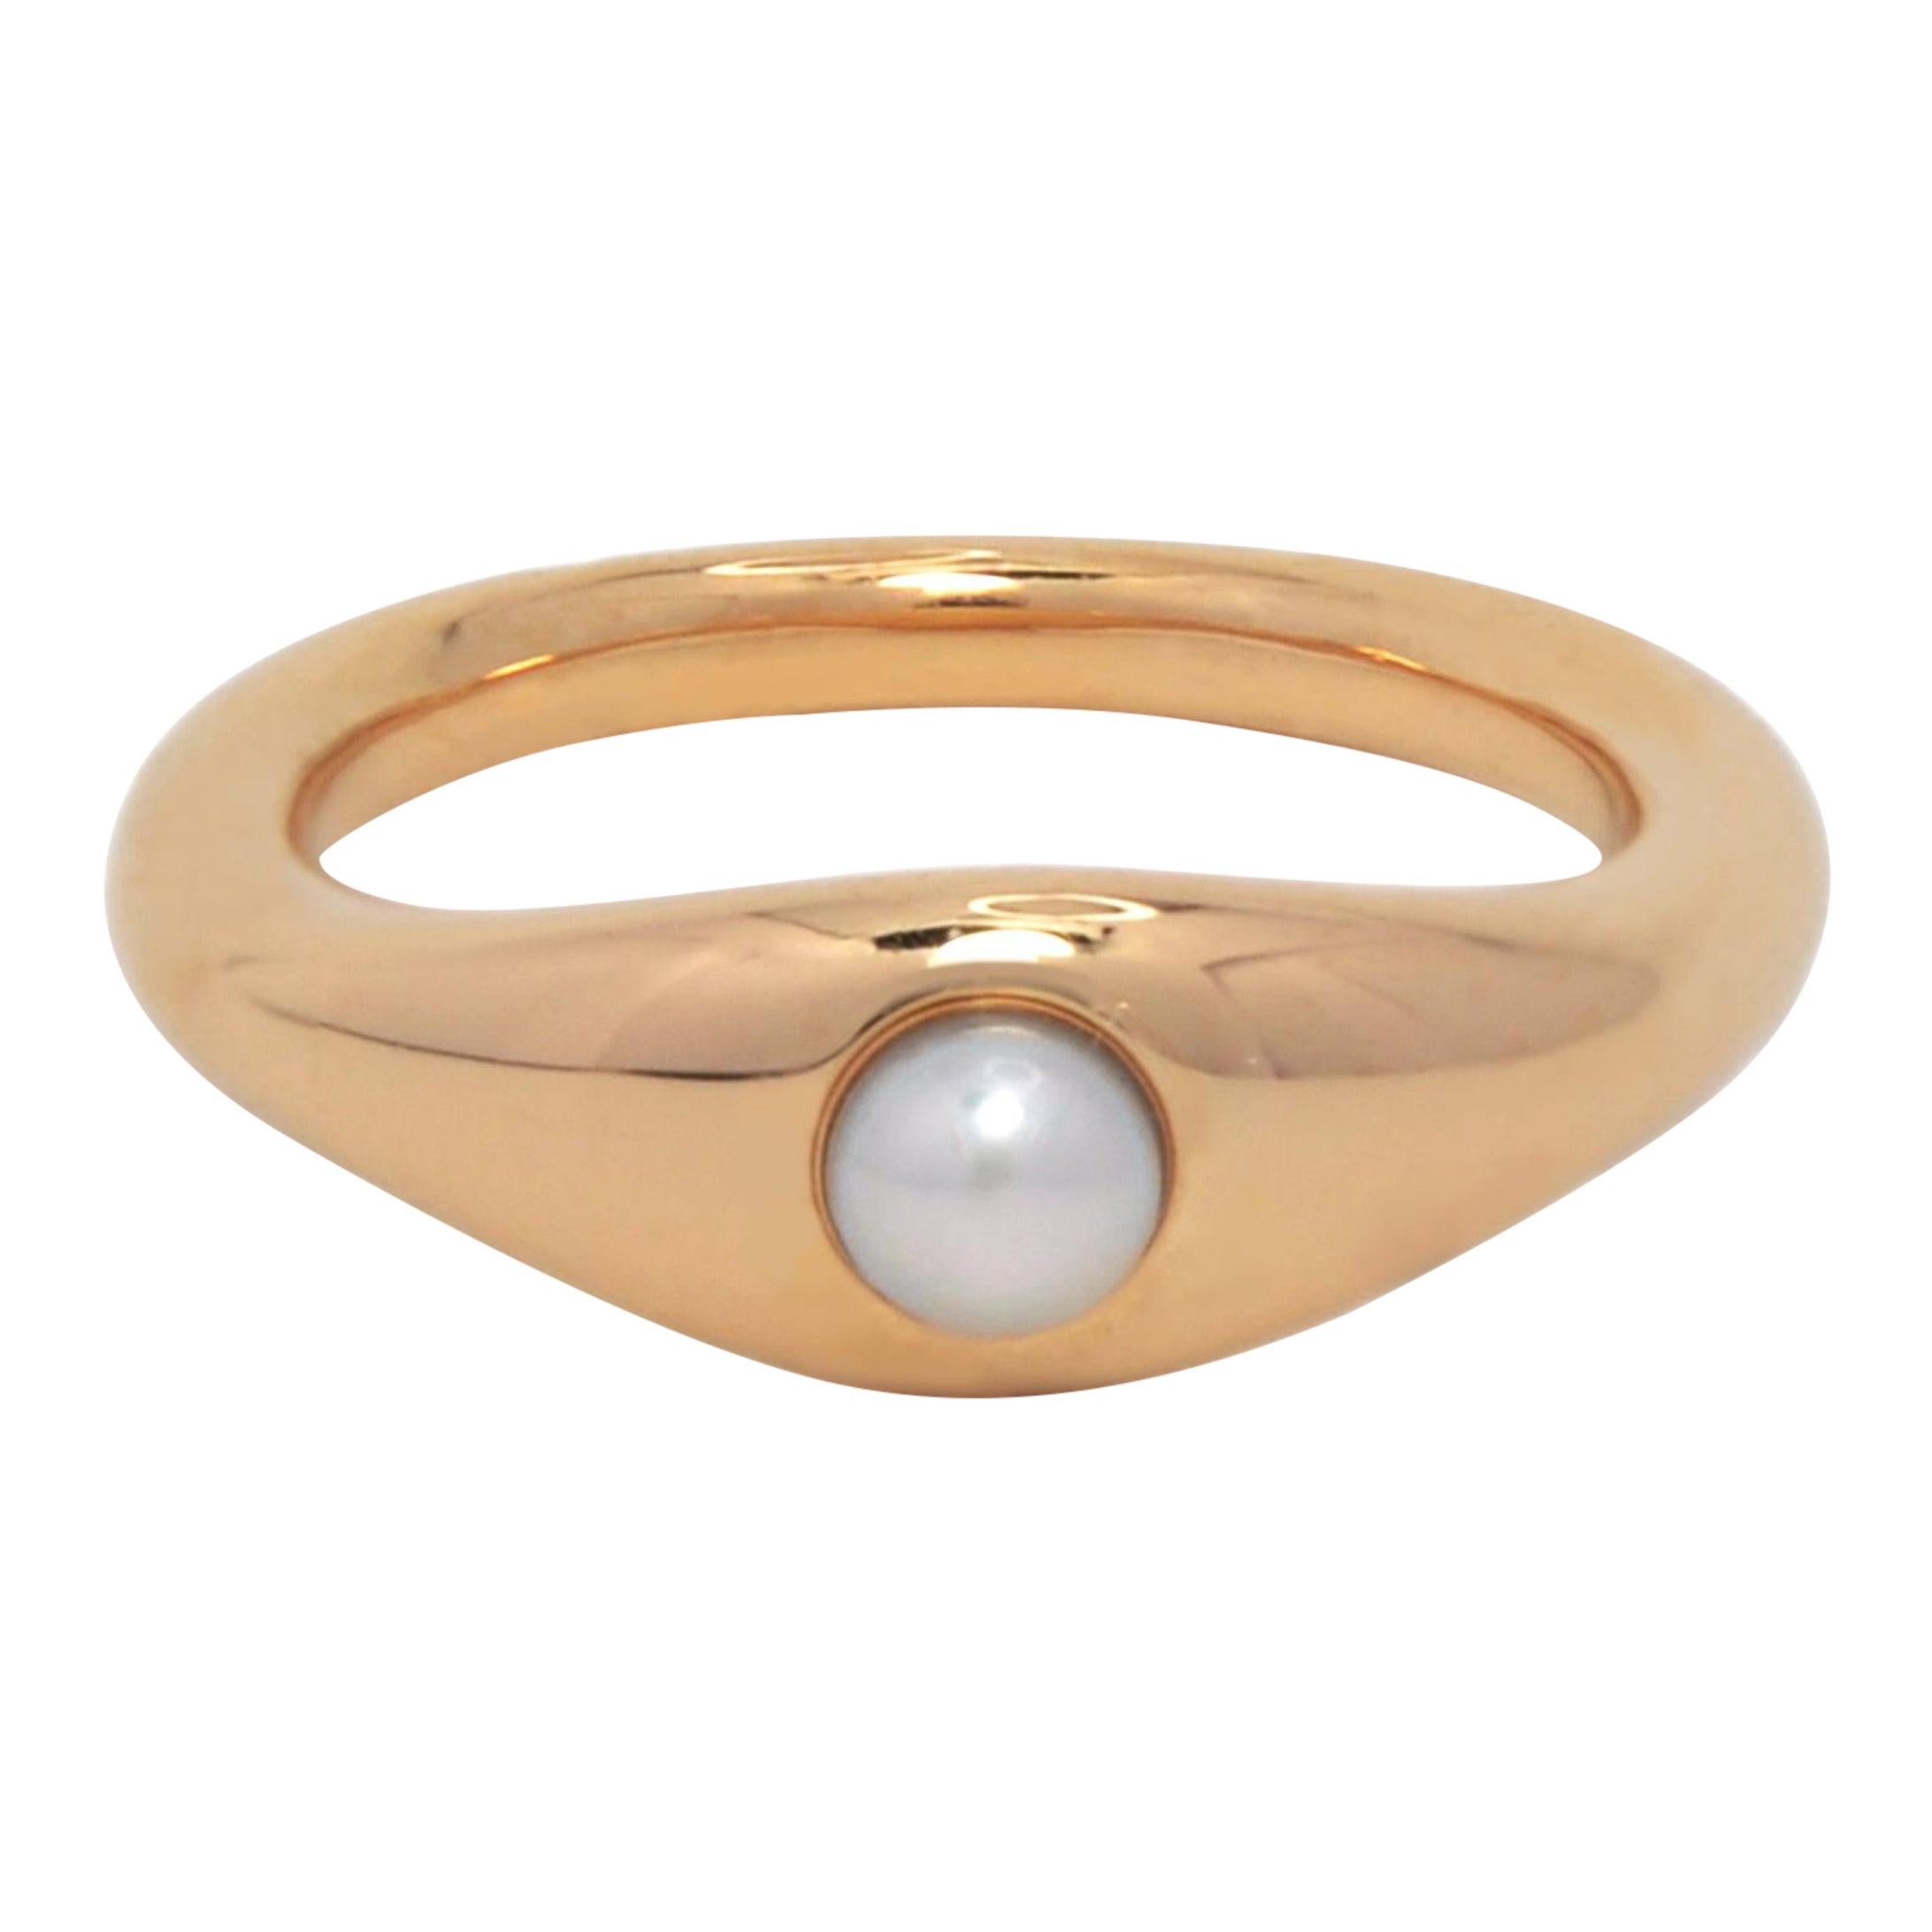 For Sale:  Ruth Nyc Lun Ring, 14k Yellow Gold and Pearl Ring